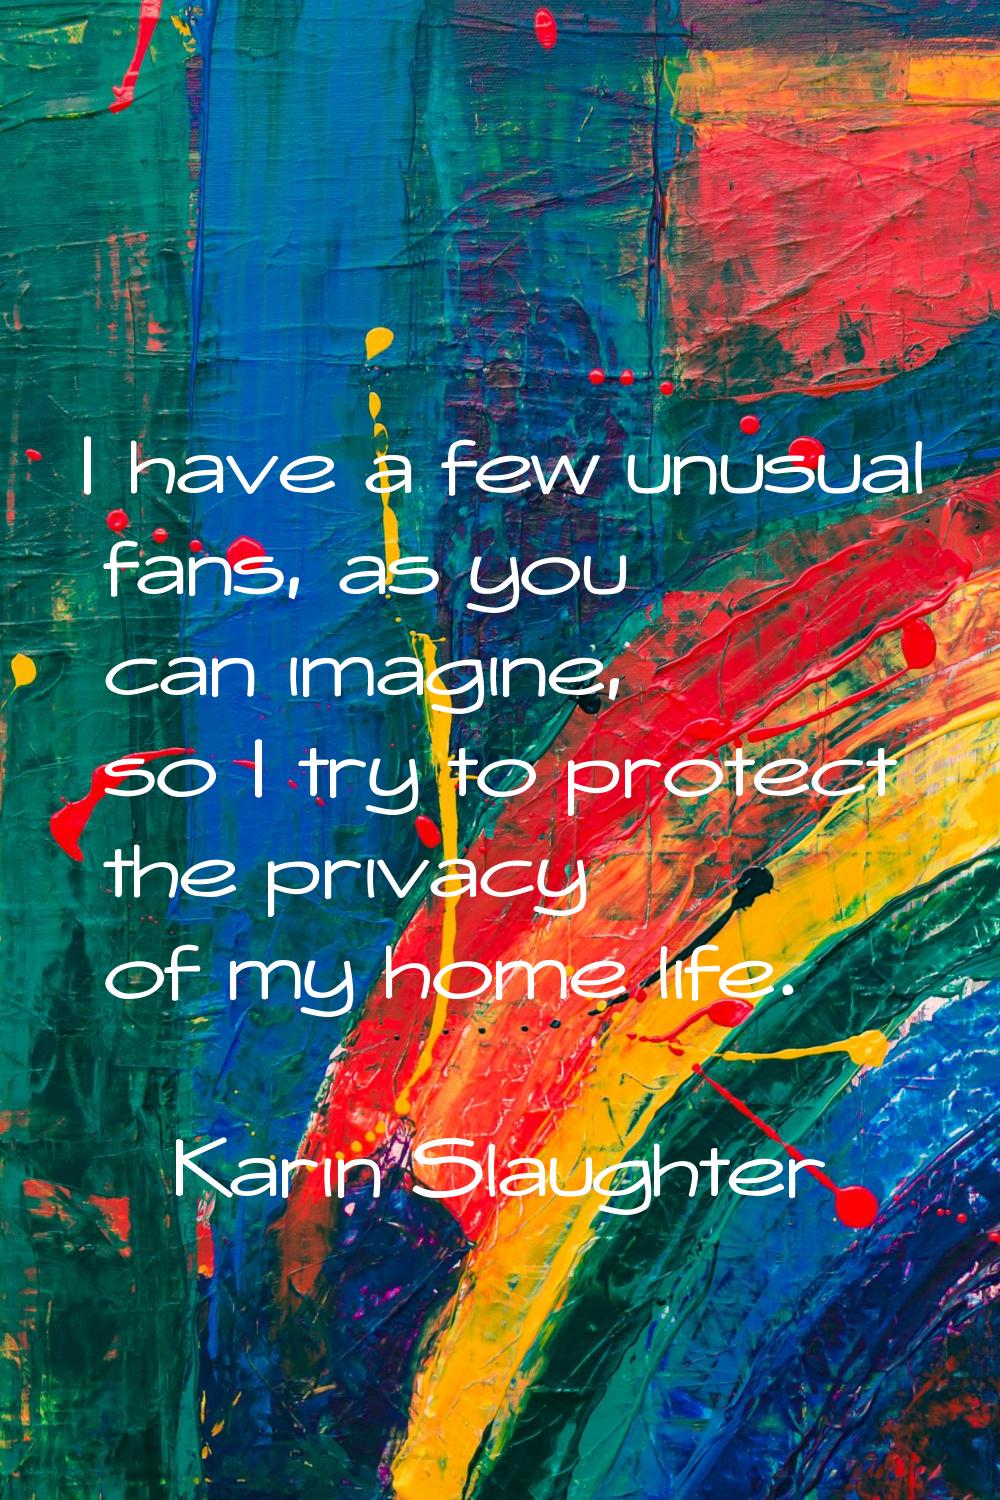 I have a few unusual fans, as you can imagine, so I try to protect the privacy of my home life.